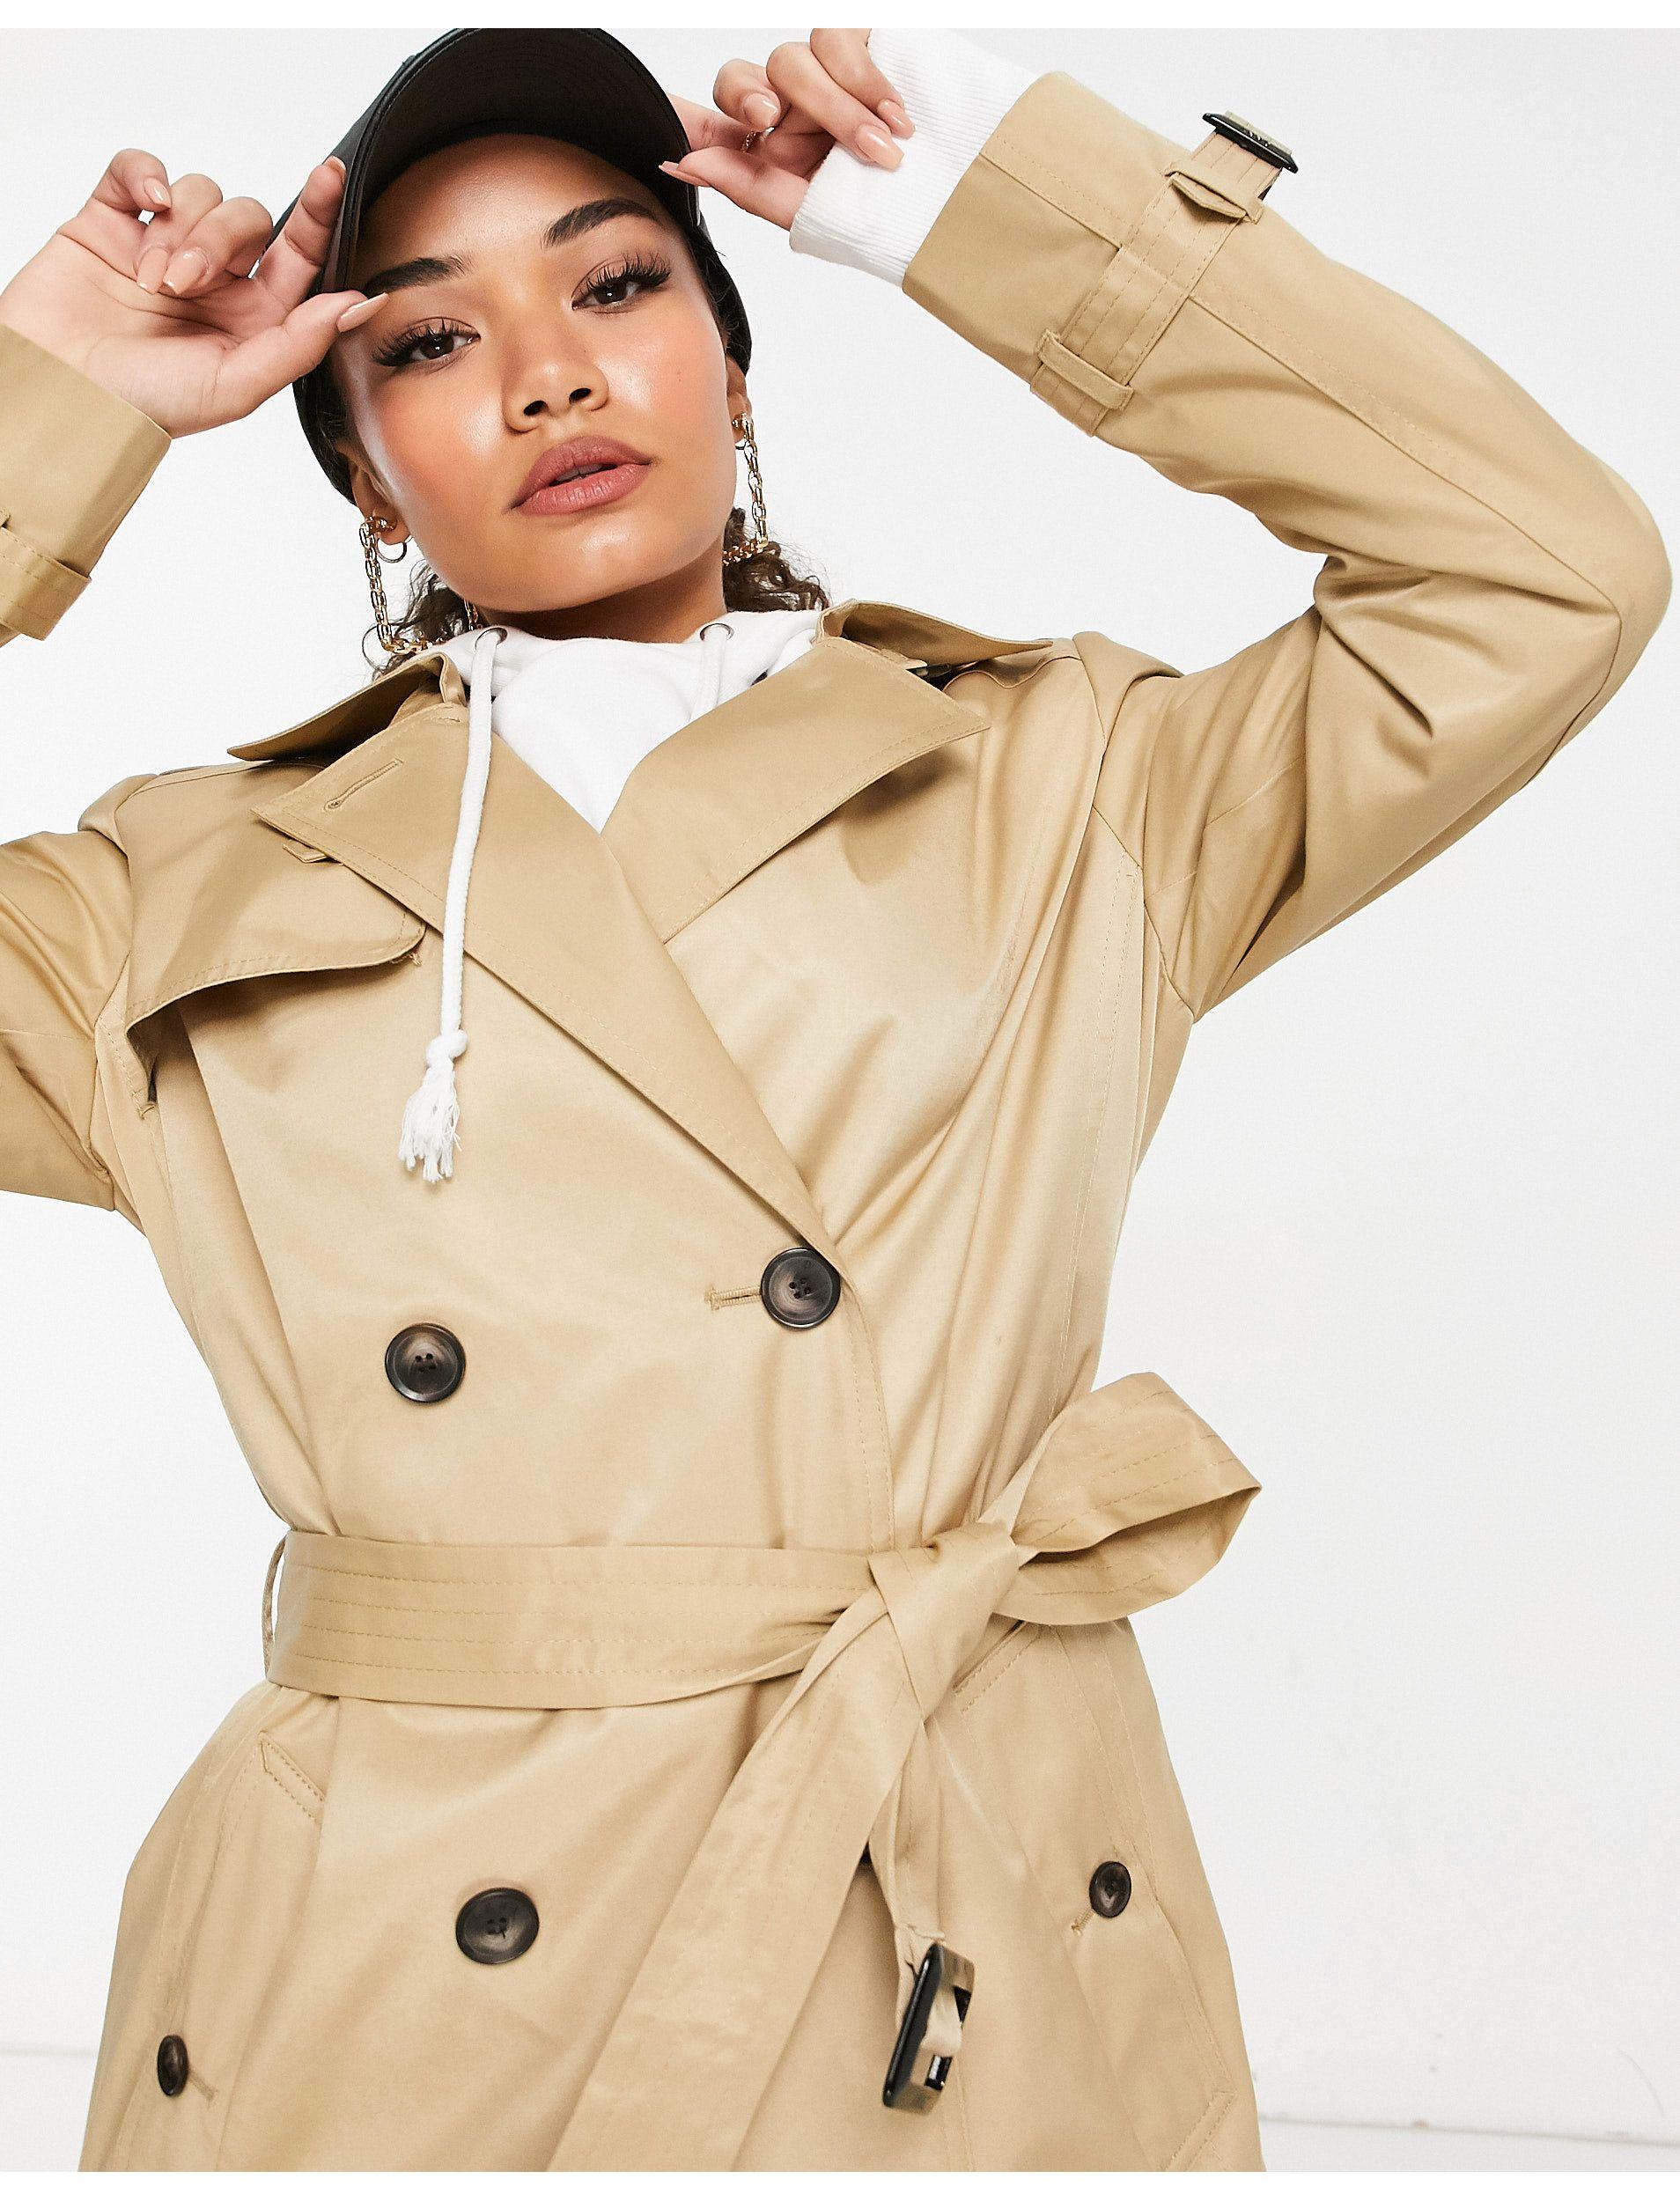 DKNY Trench Coat in Tan (Natural) - Lyst